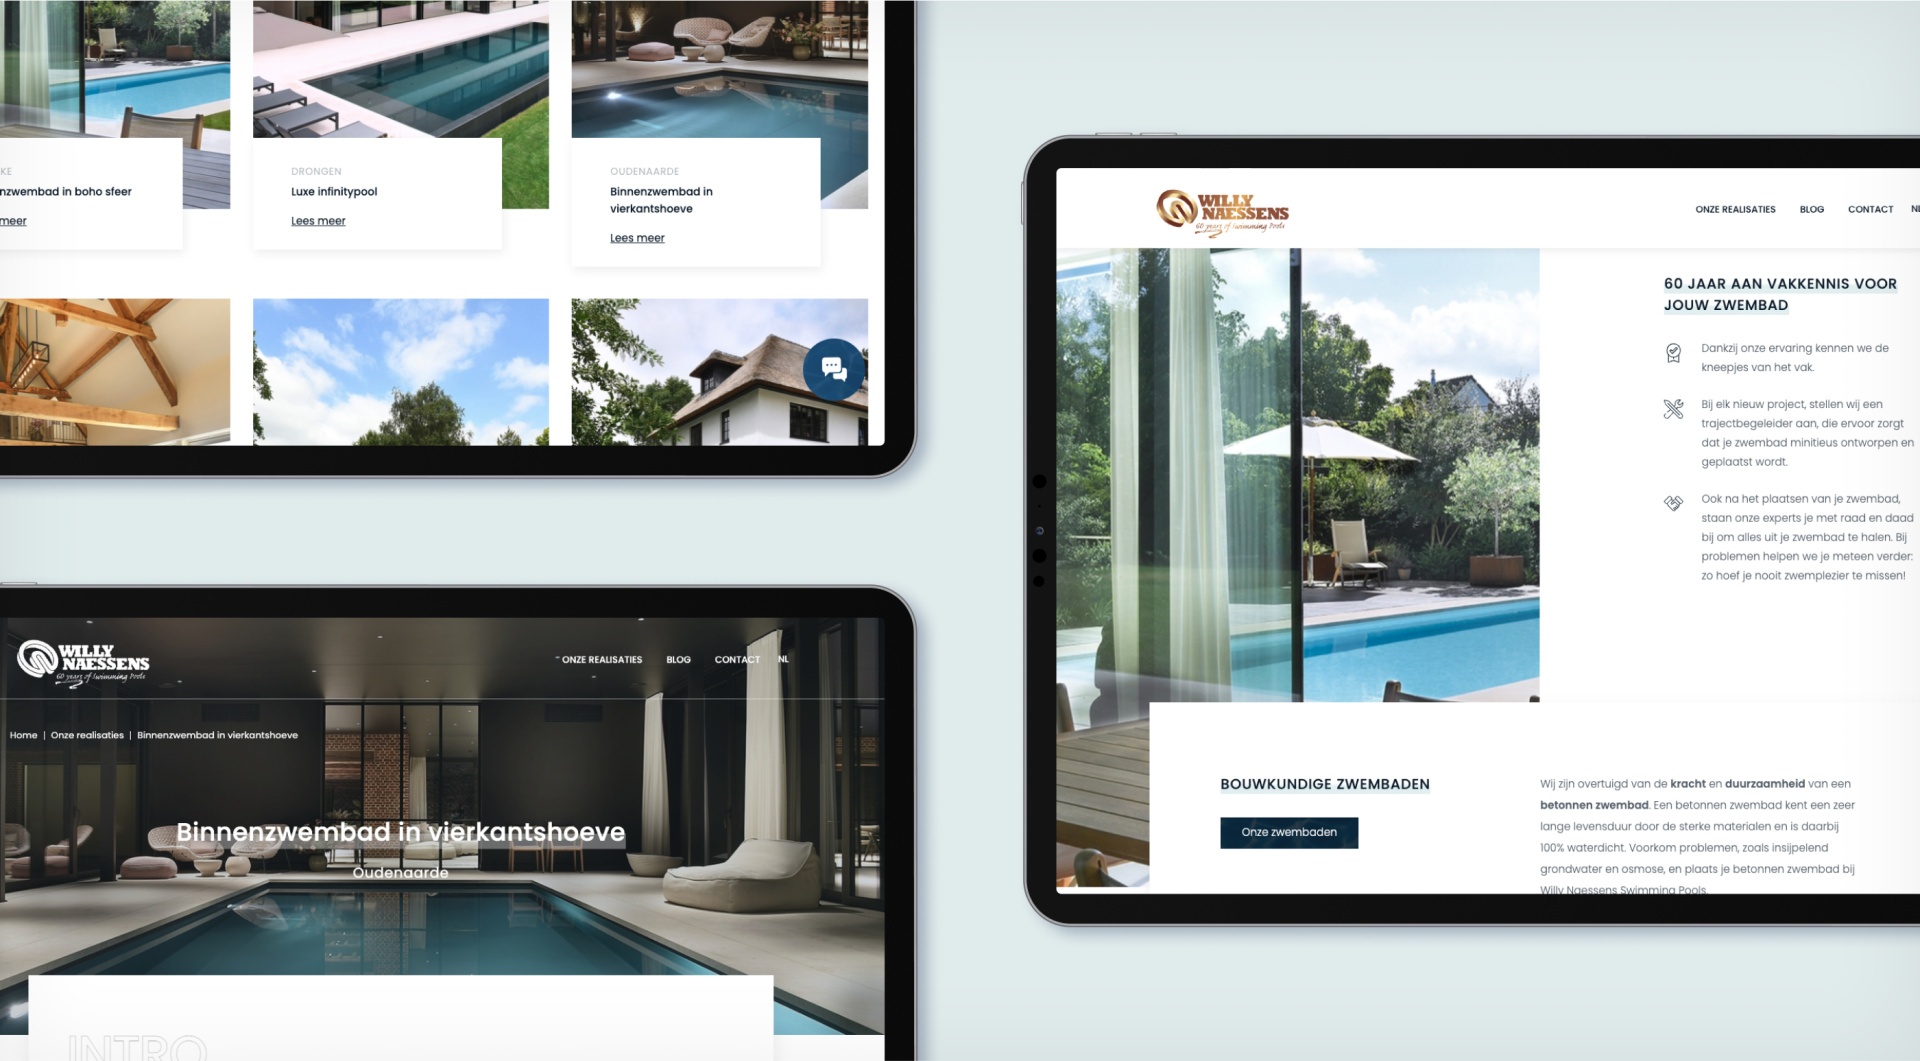 Willy Naessens Swimming Pools - website tablet mockup